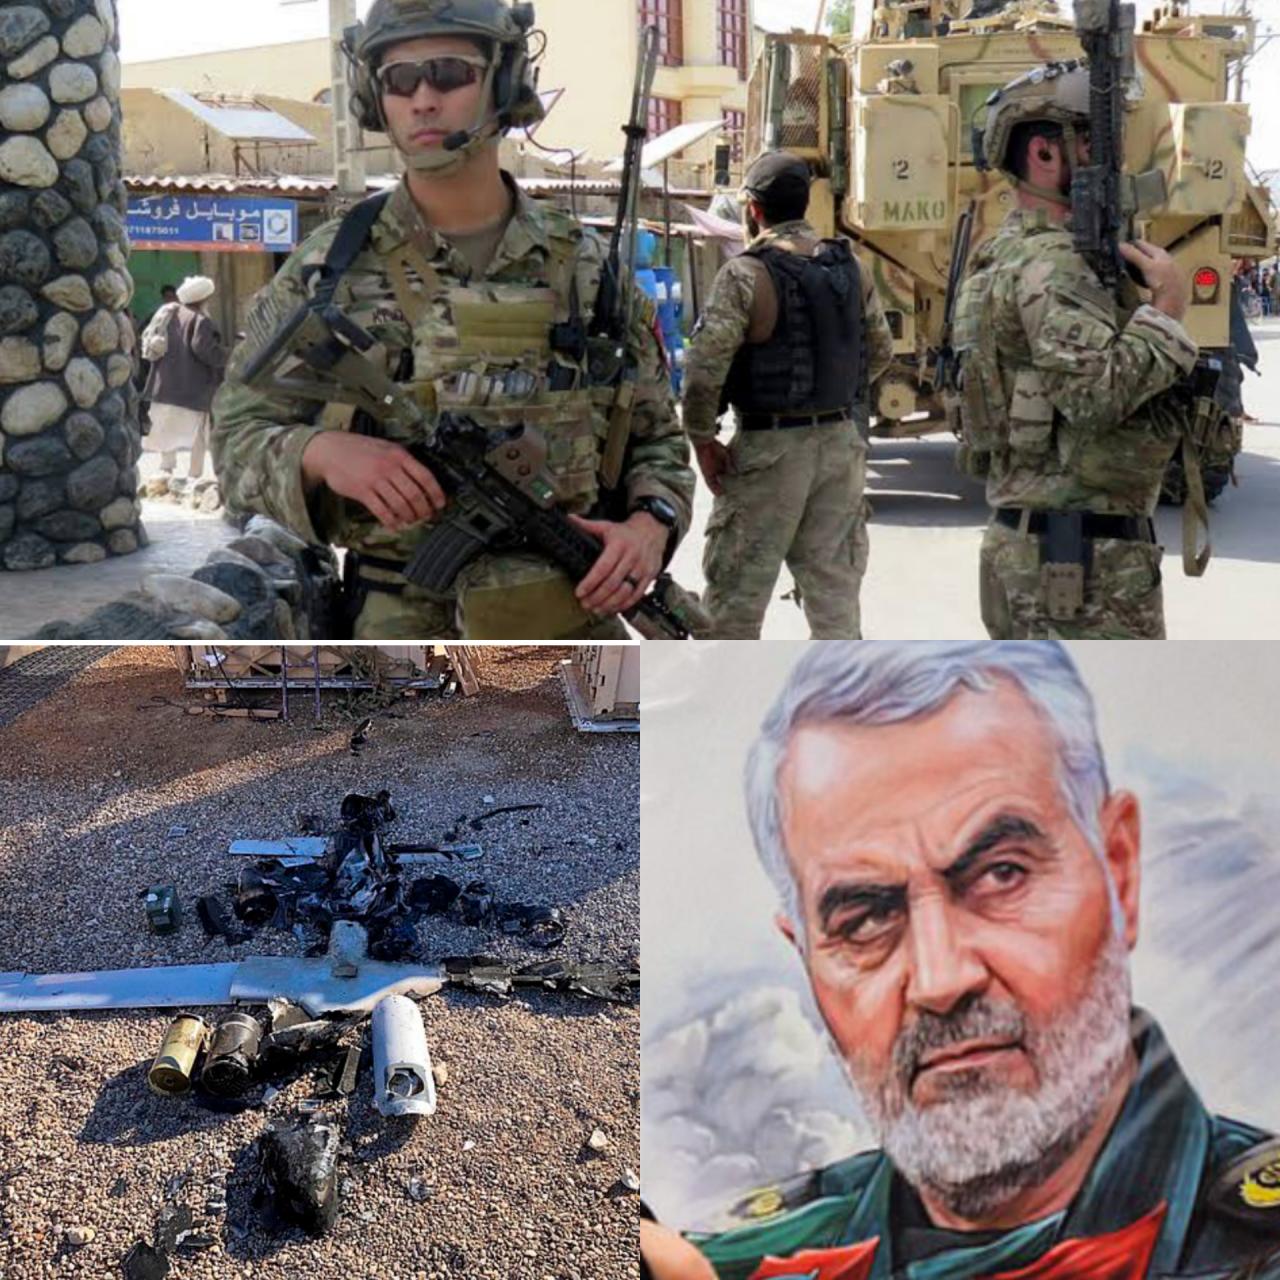 US forces shoot down two bomb drones approaching US facility in Iraq a day after Iran vowed revenge over General Soleimani